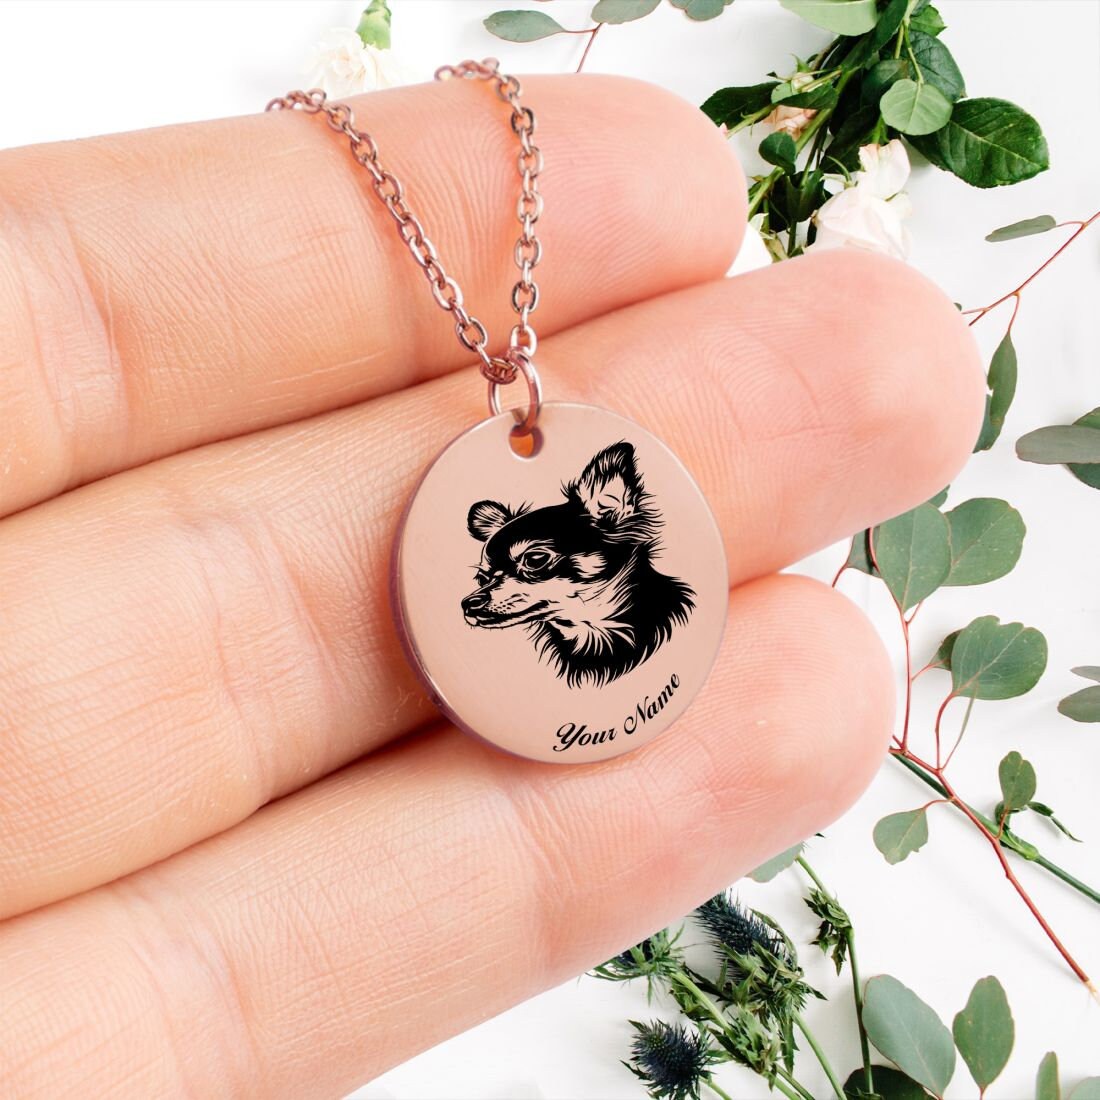 Chihuahua Dog Portrait Necklace - Personalizable Jewelry